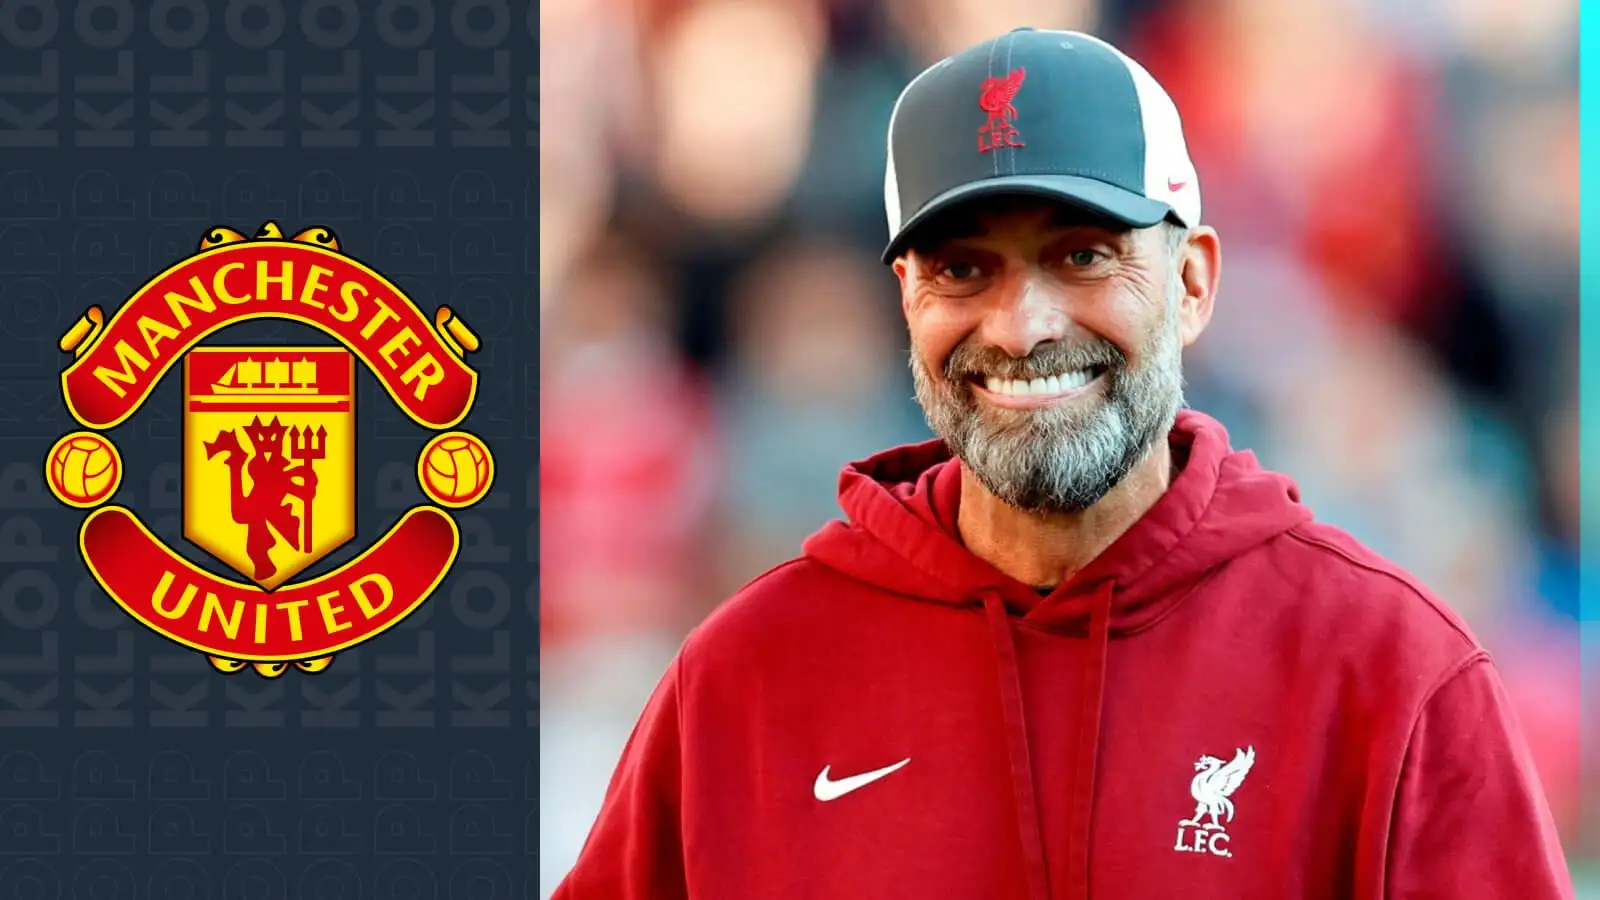 Jurgen Klopp with a Manchester Joined badge